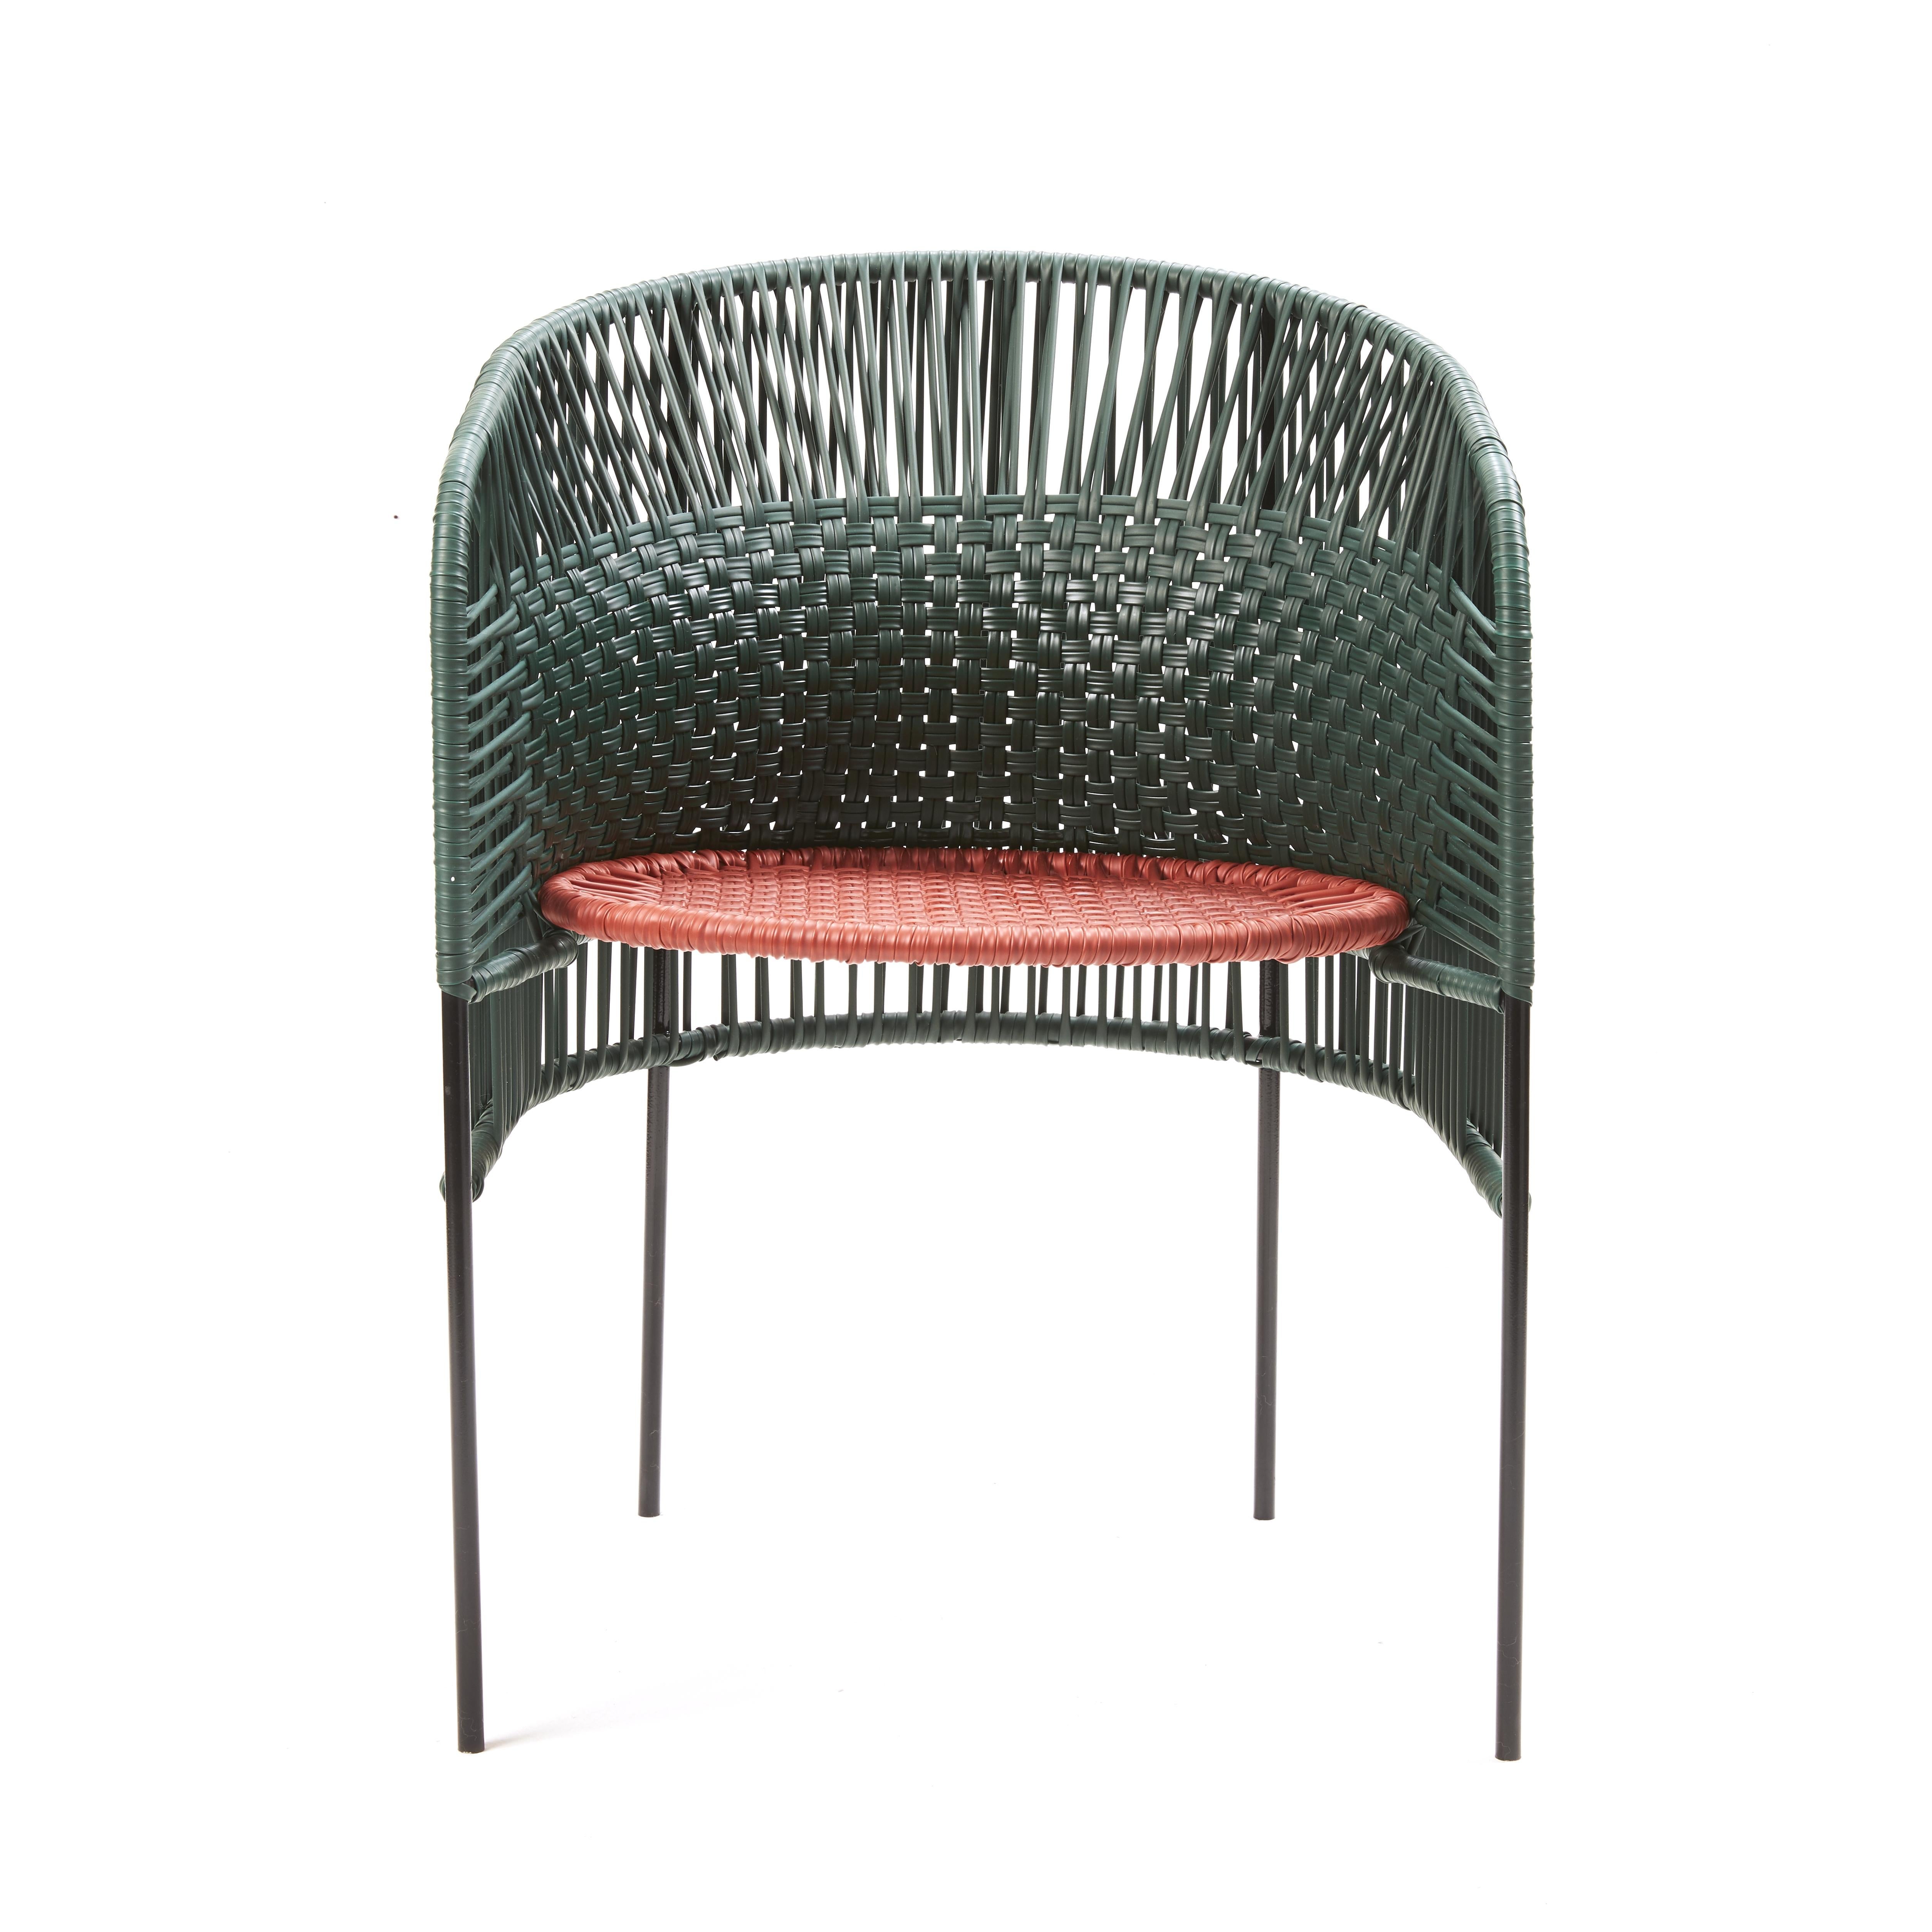 Set of 4 Green Caribe chic dining chair by Sebastian Herkner
Materials: Galvanized and powder-coated tubular steel. PVC strings are made from recycled plastic.
Technique: Made from recycled plastic and weaved by local craftspeople in Colombia.